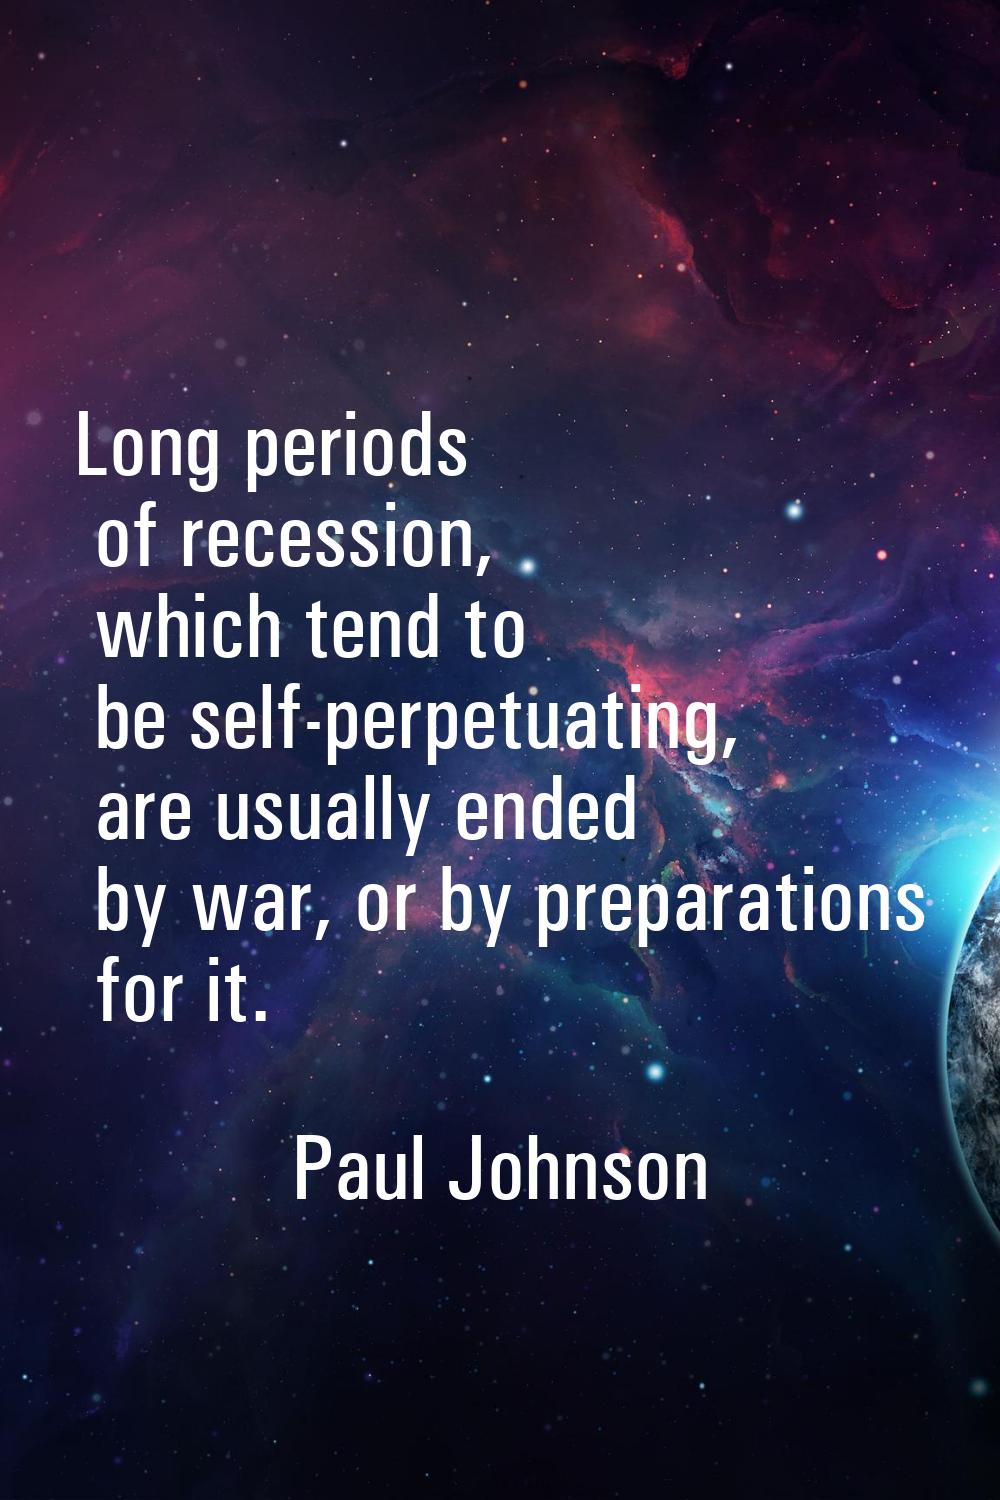 Long periods of recession, which tend to be self-perpetuating, are usually ended by war, or by prep